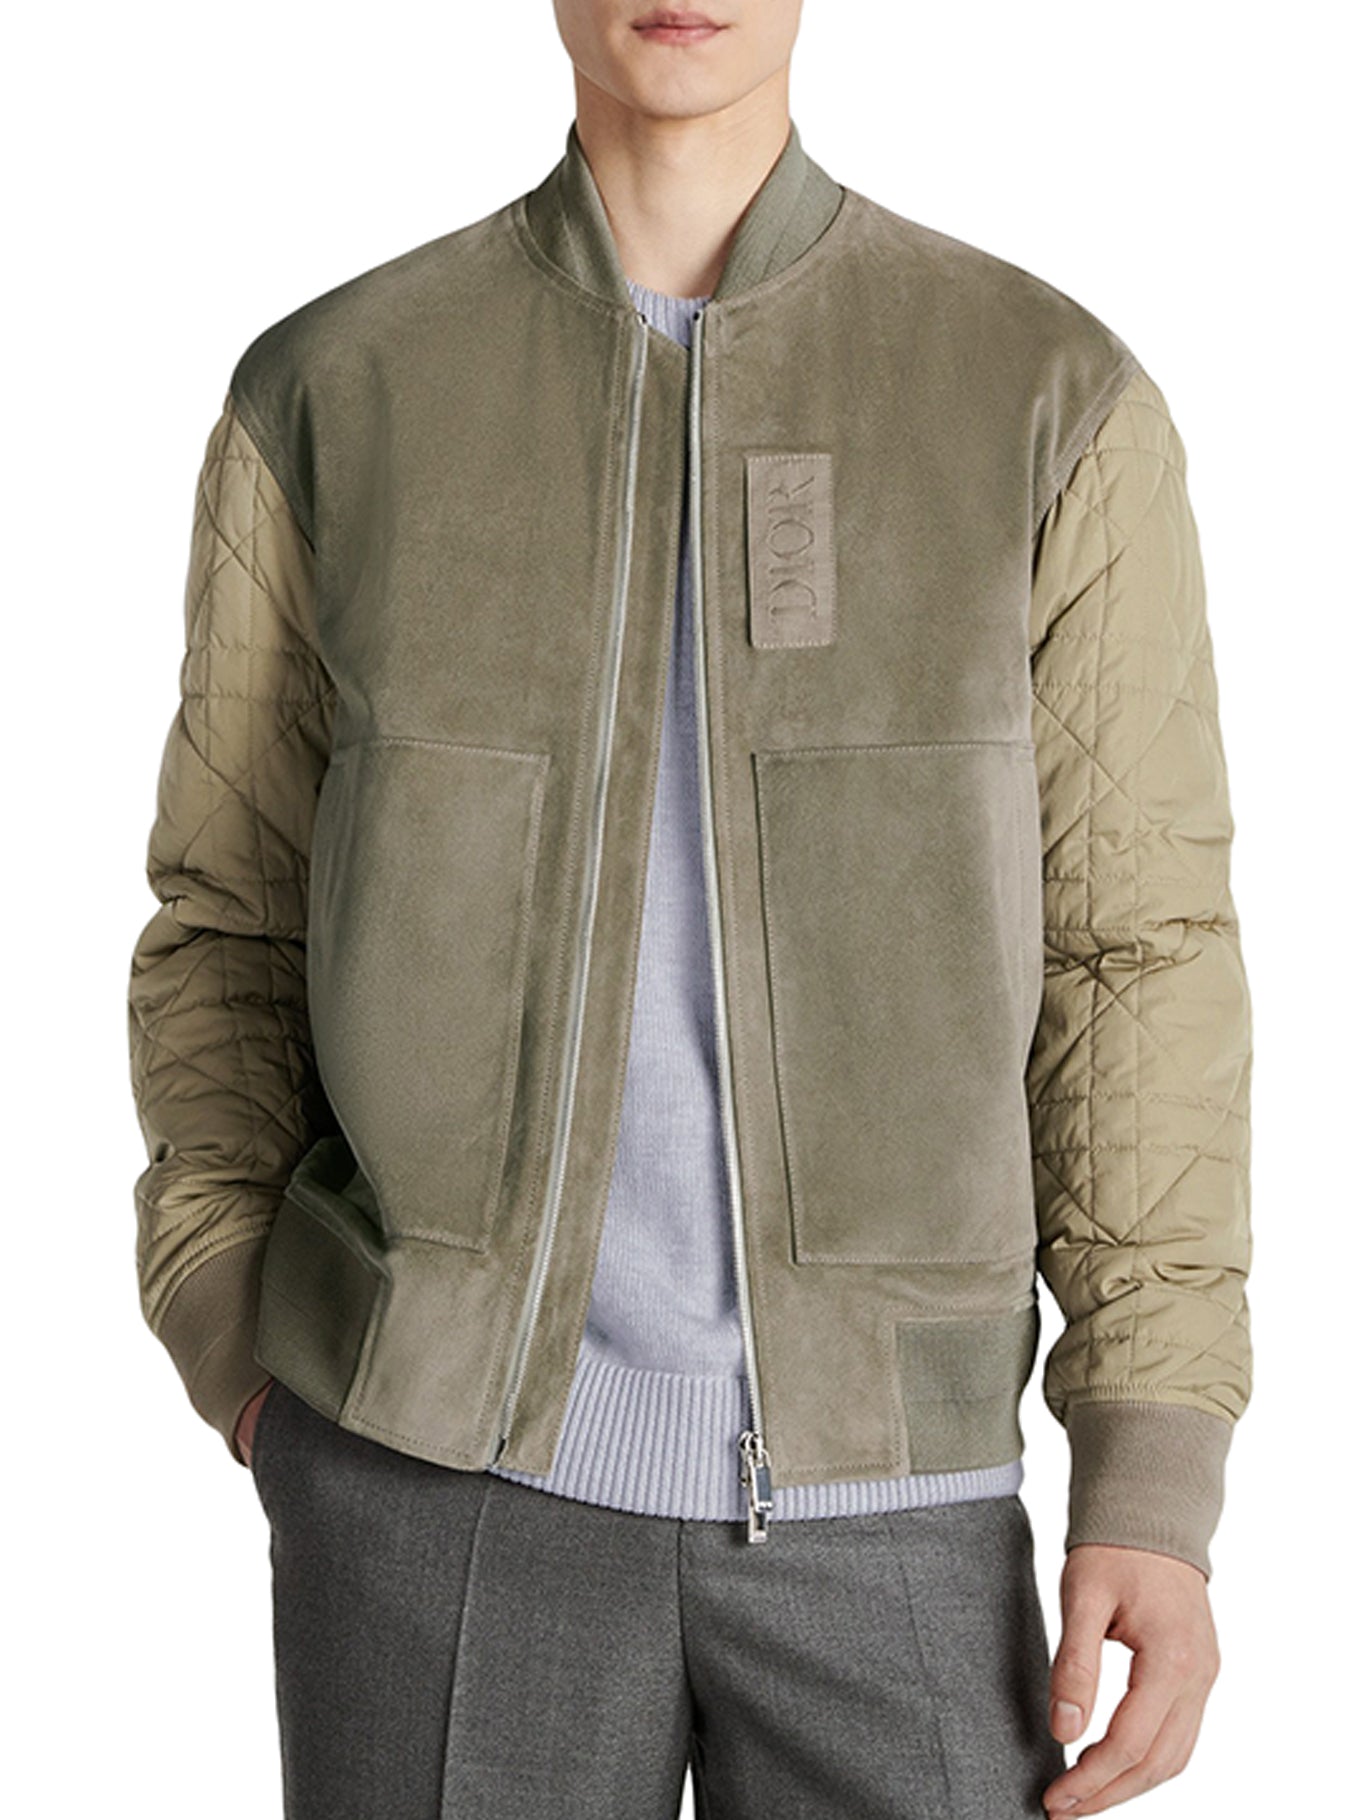 COLLEGE STYLE ZIPPERED JACKET